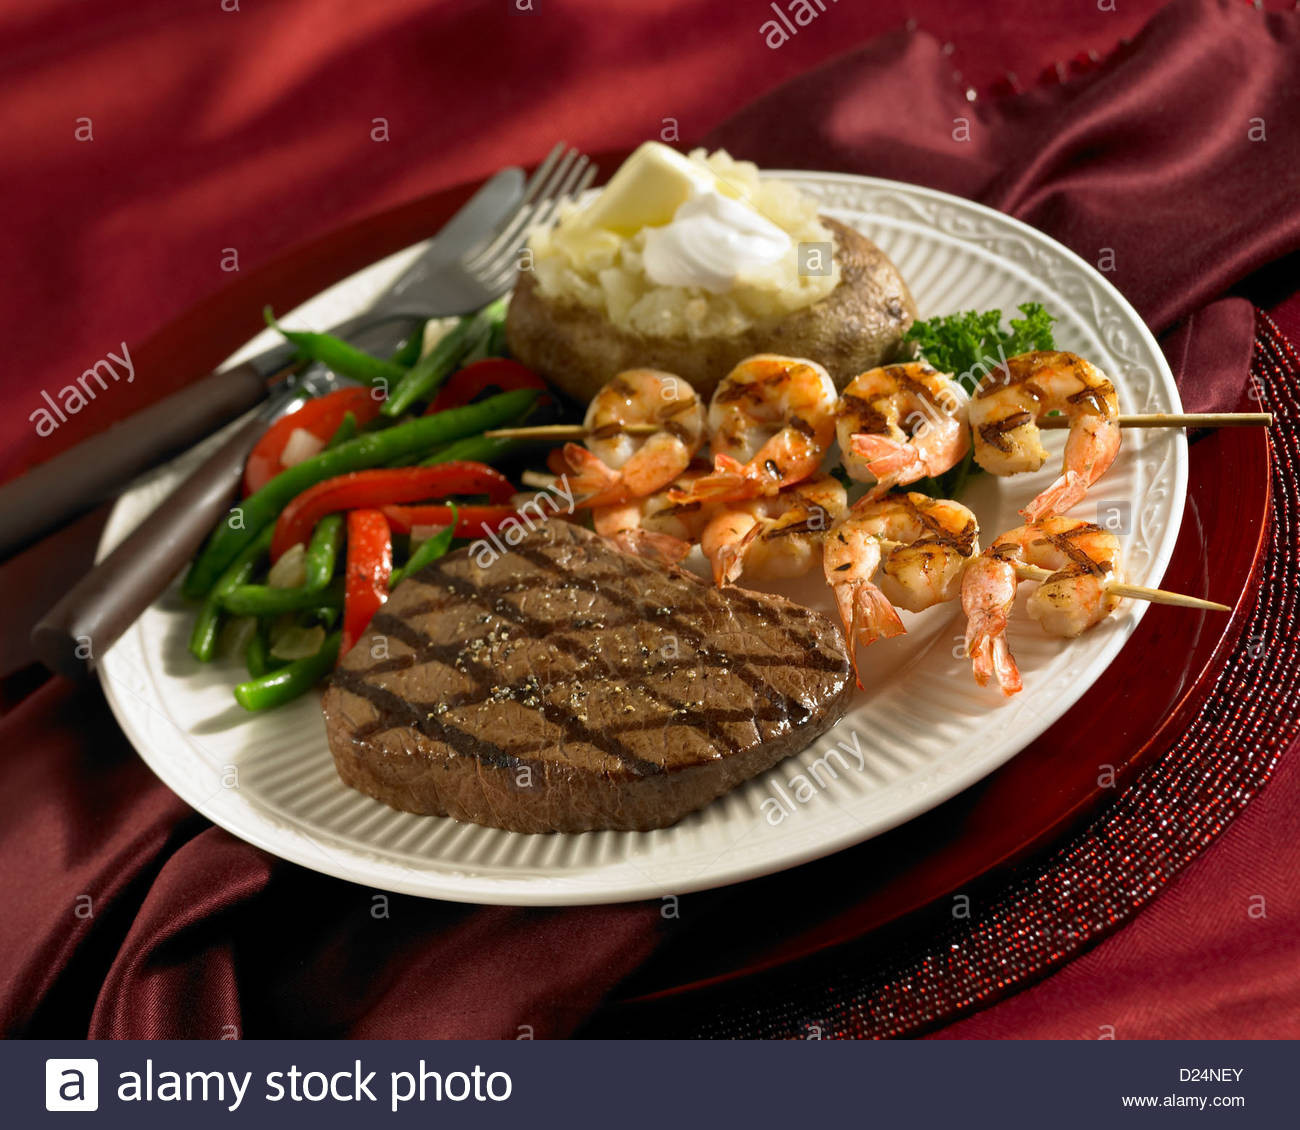 Best 35 Steak and Shrimp Dinners - Home, Family, Style and Art Ideas